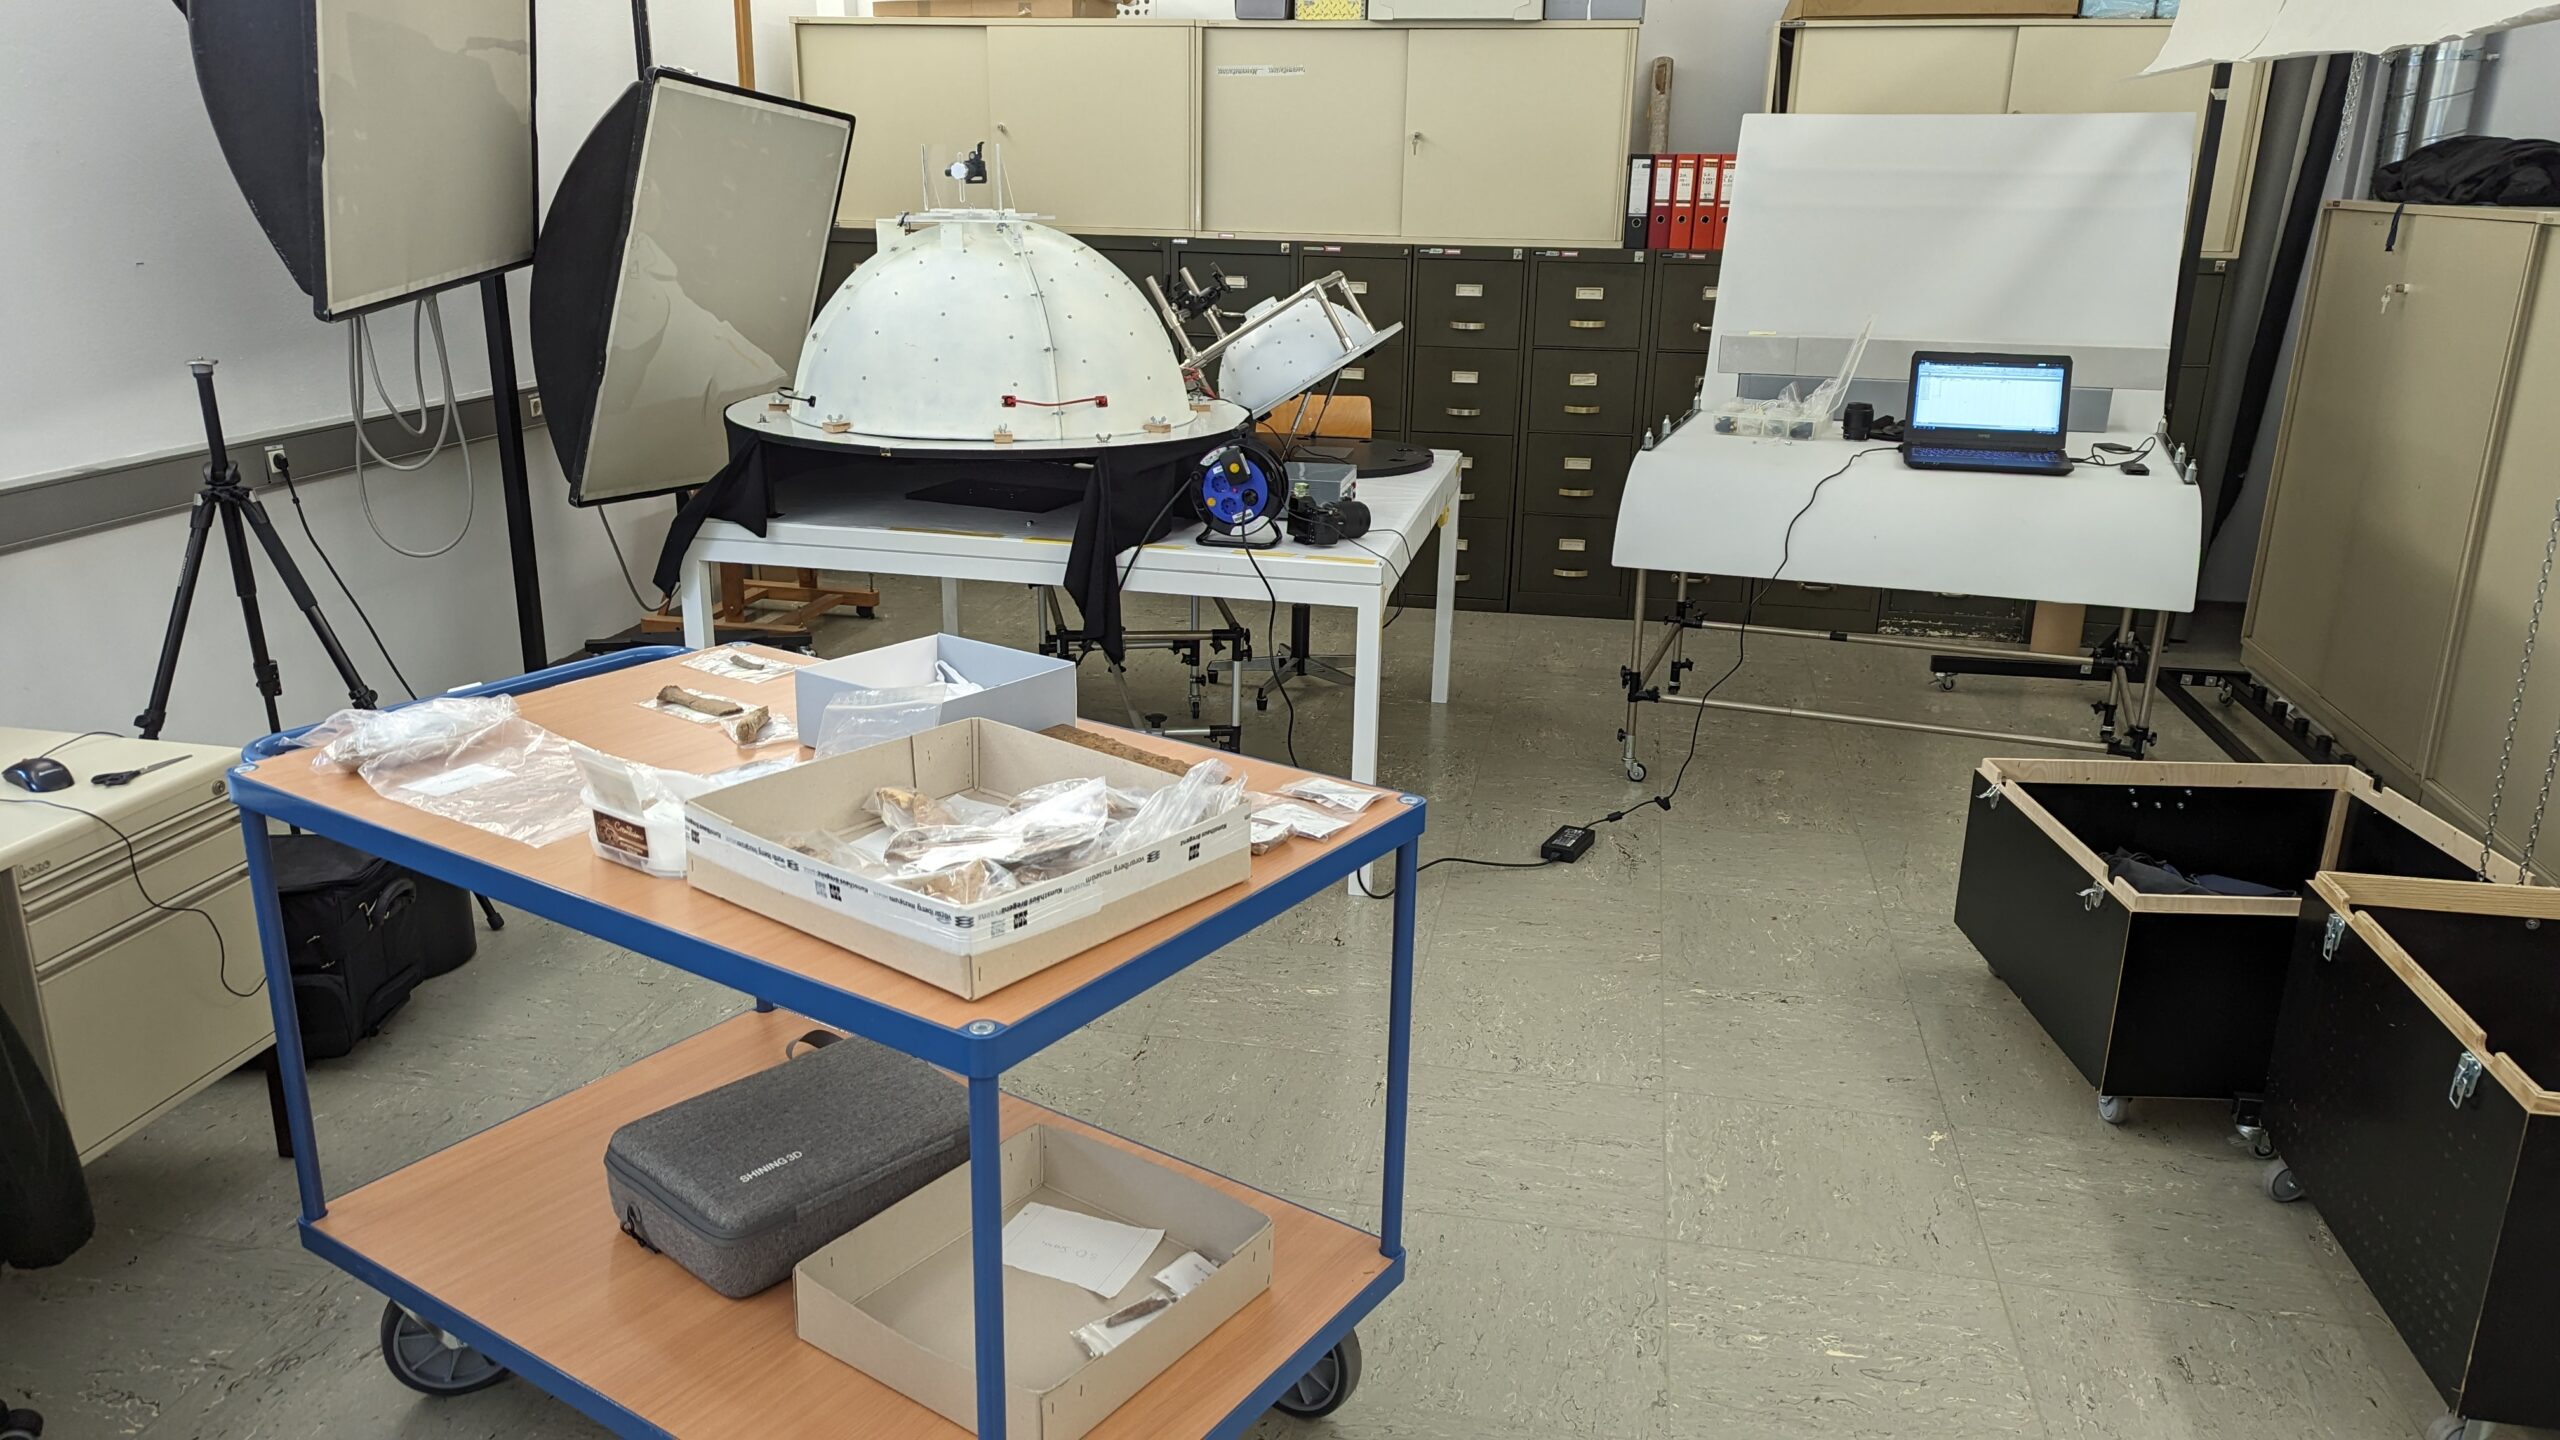 This image shows the place I worked in with a lot of different gear. Foremost, you see two RTI domes that I used for scanning.